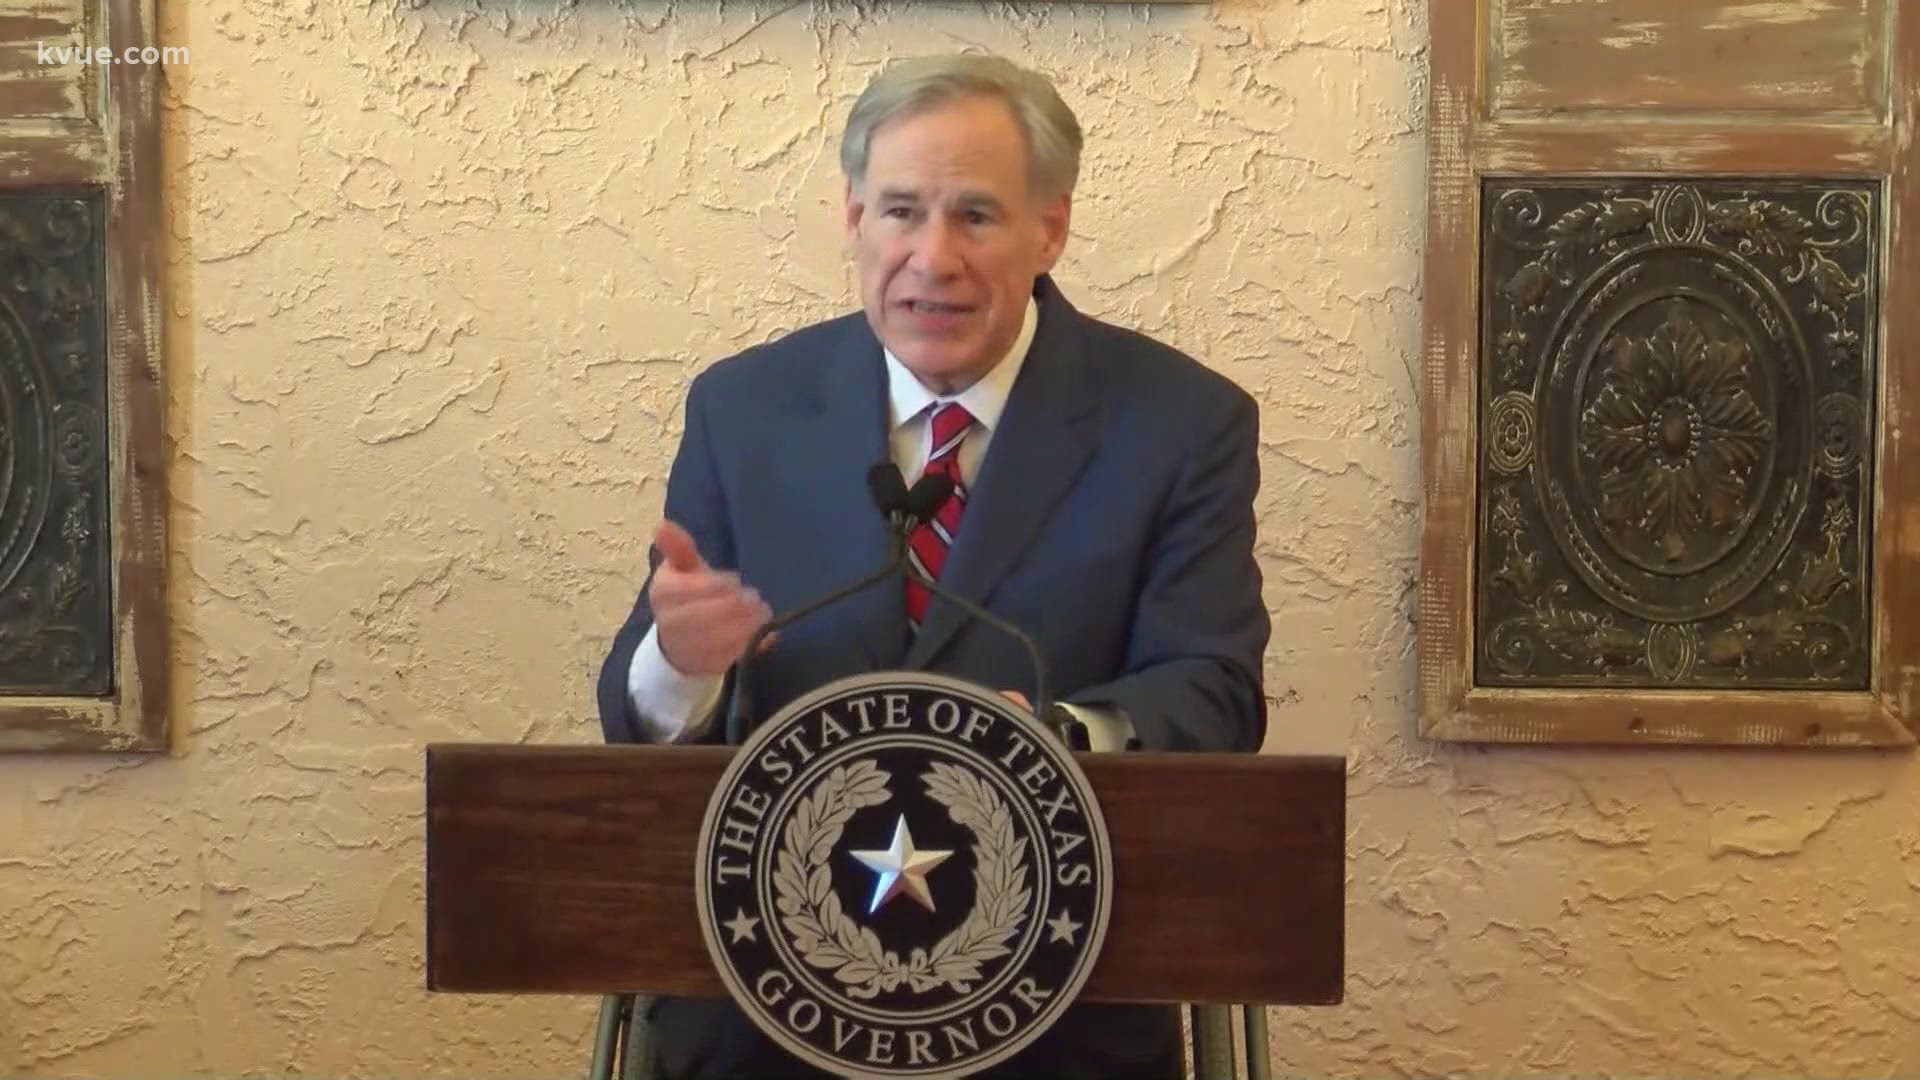 Texas Gov. Greg Abbott announced he is lifting the statewide mask mandate. However, there are federal orders that still require masks to be worn in certain places.